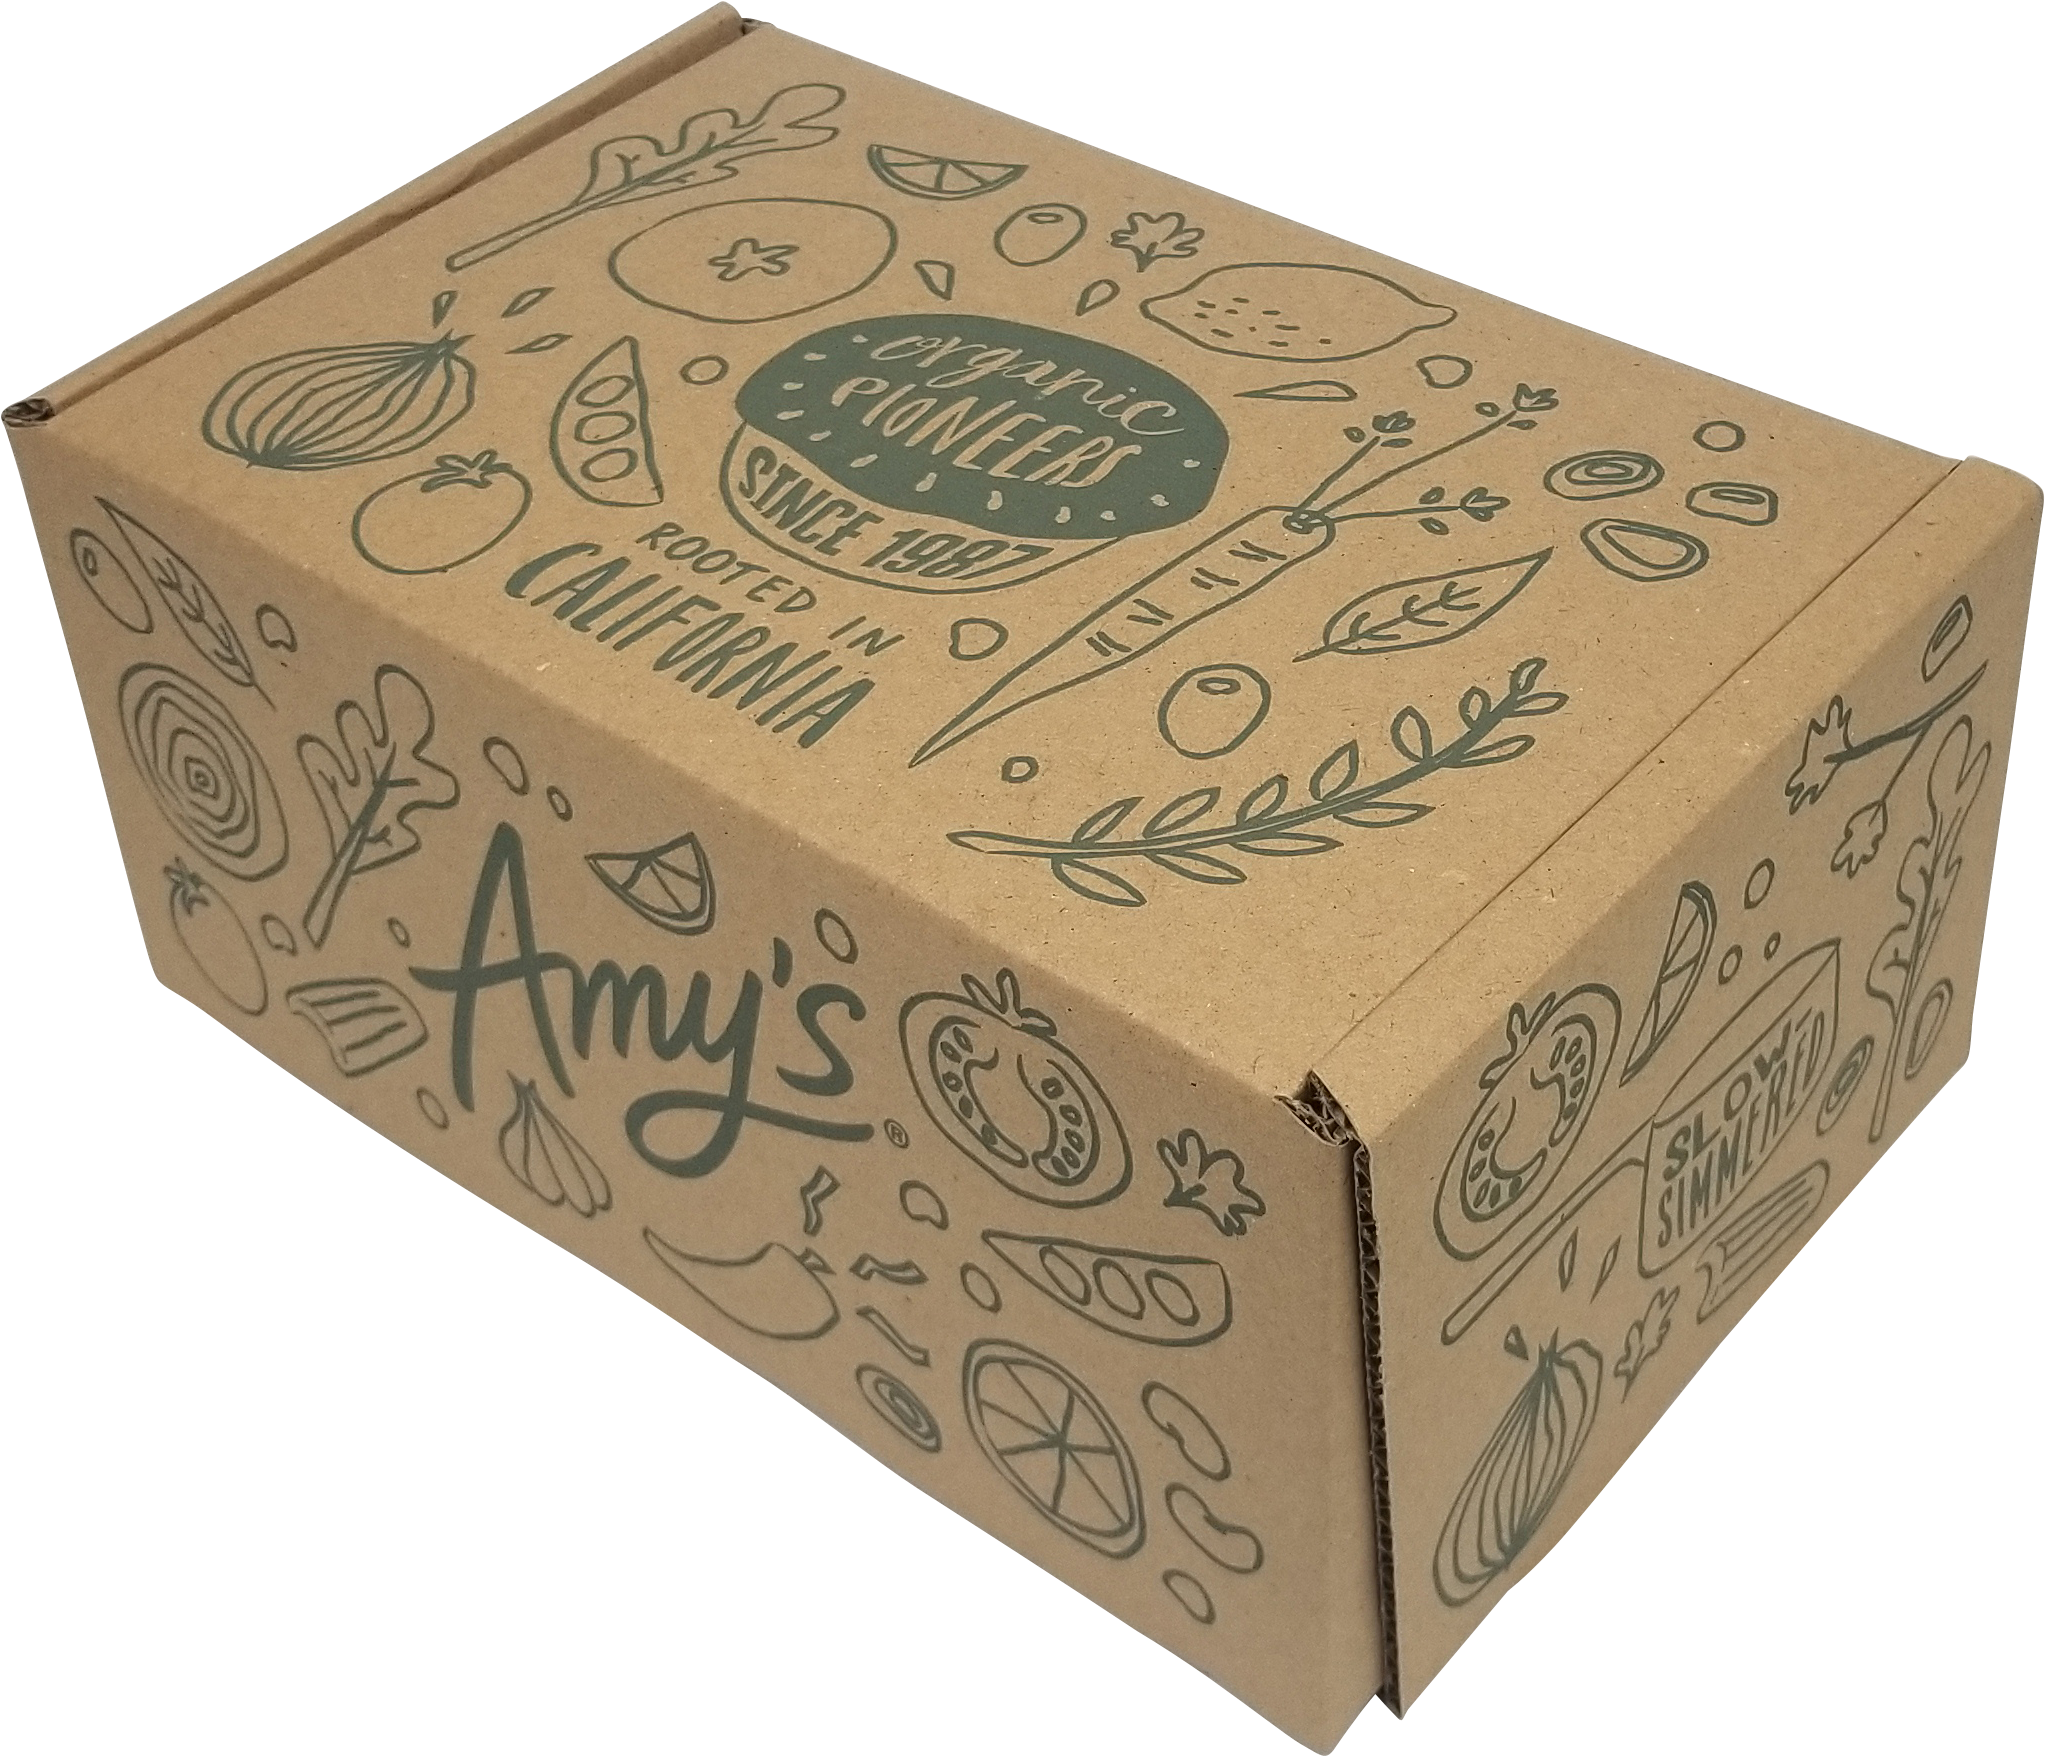 A Box With Drawings On It